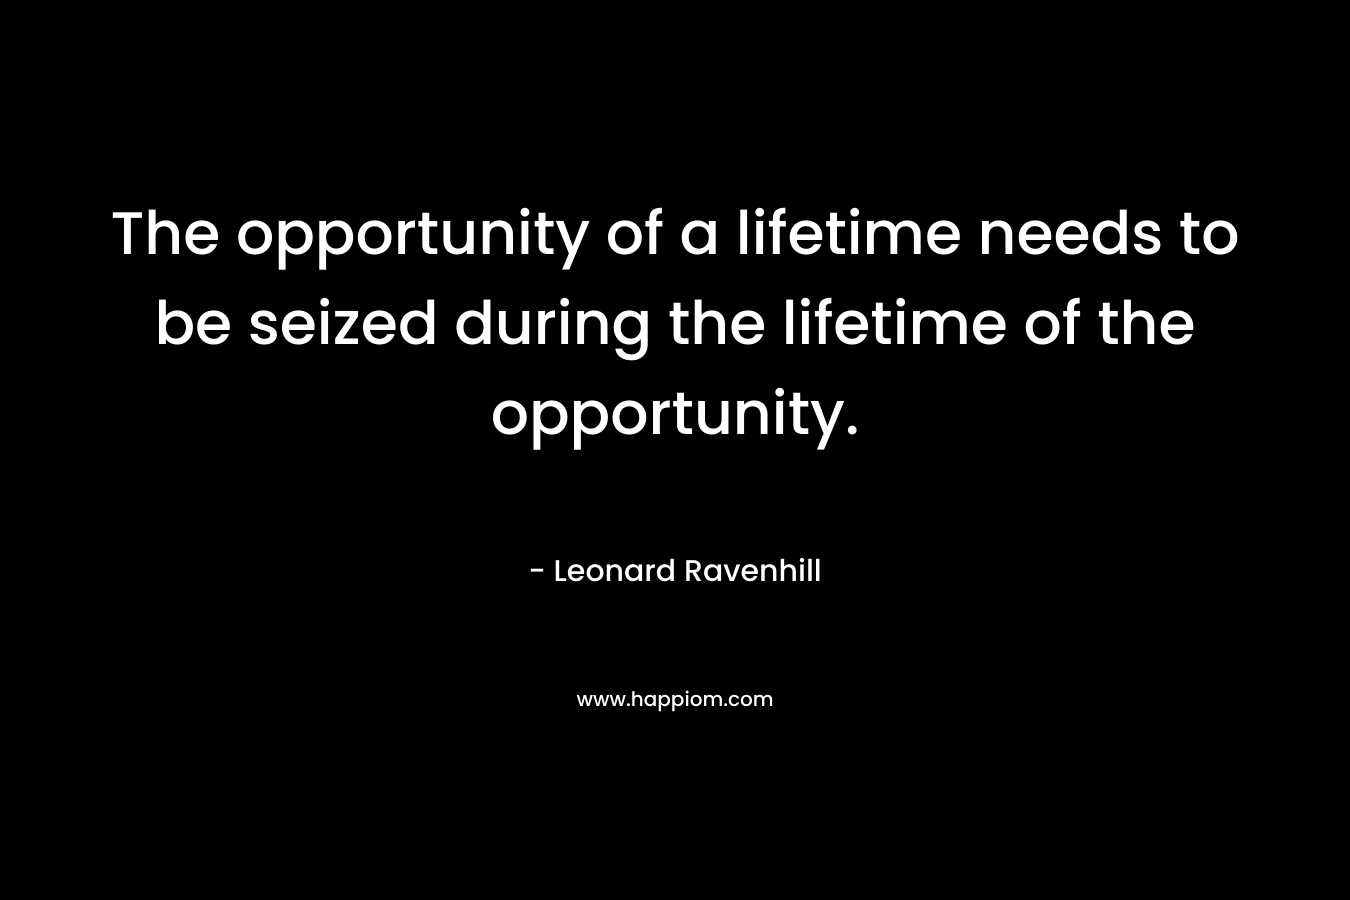 The opportunity of a lifetime needs to be seized during the lifetime of the opportunity.